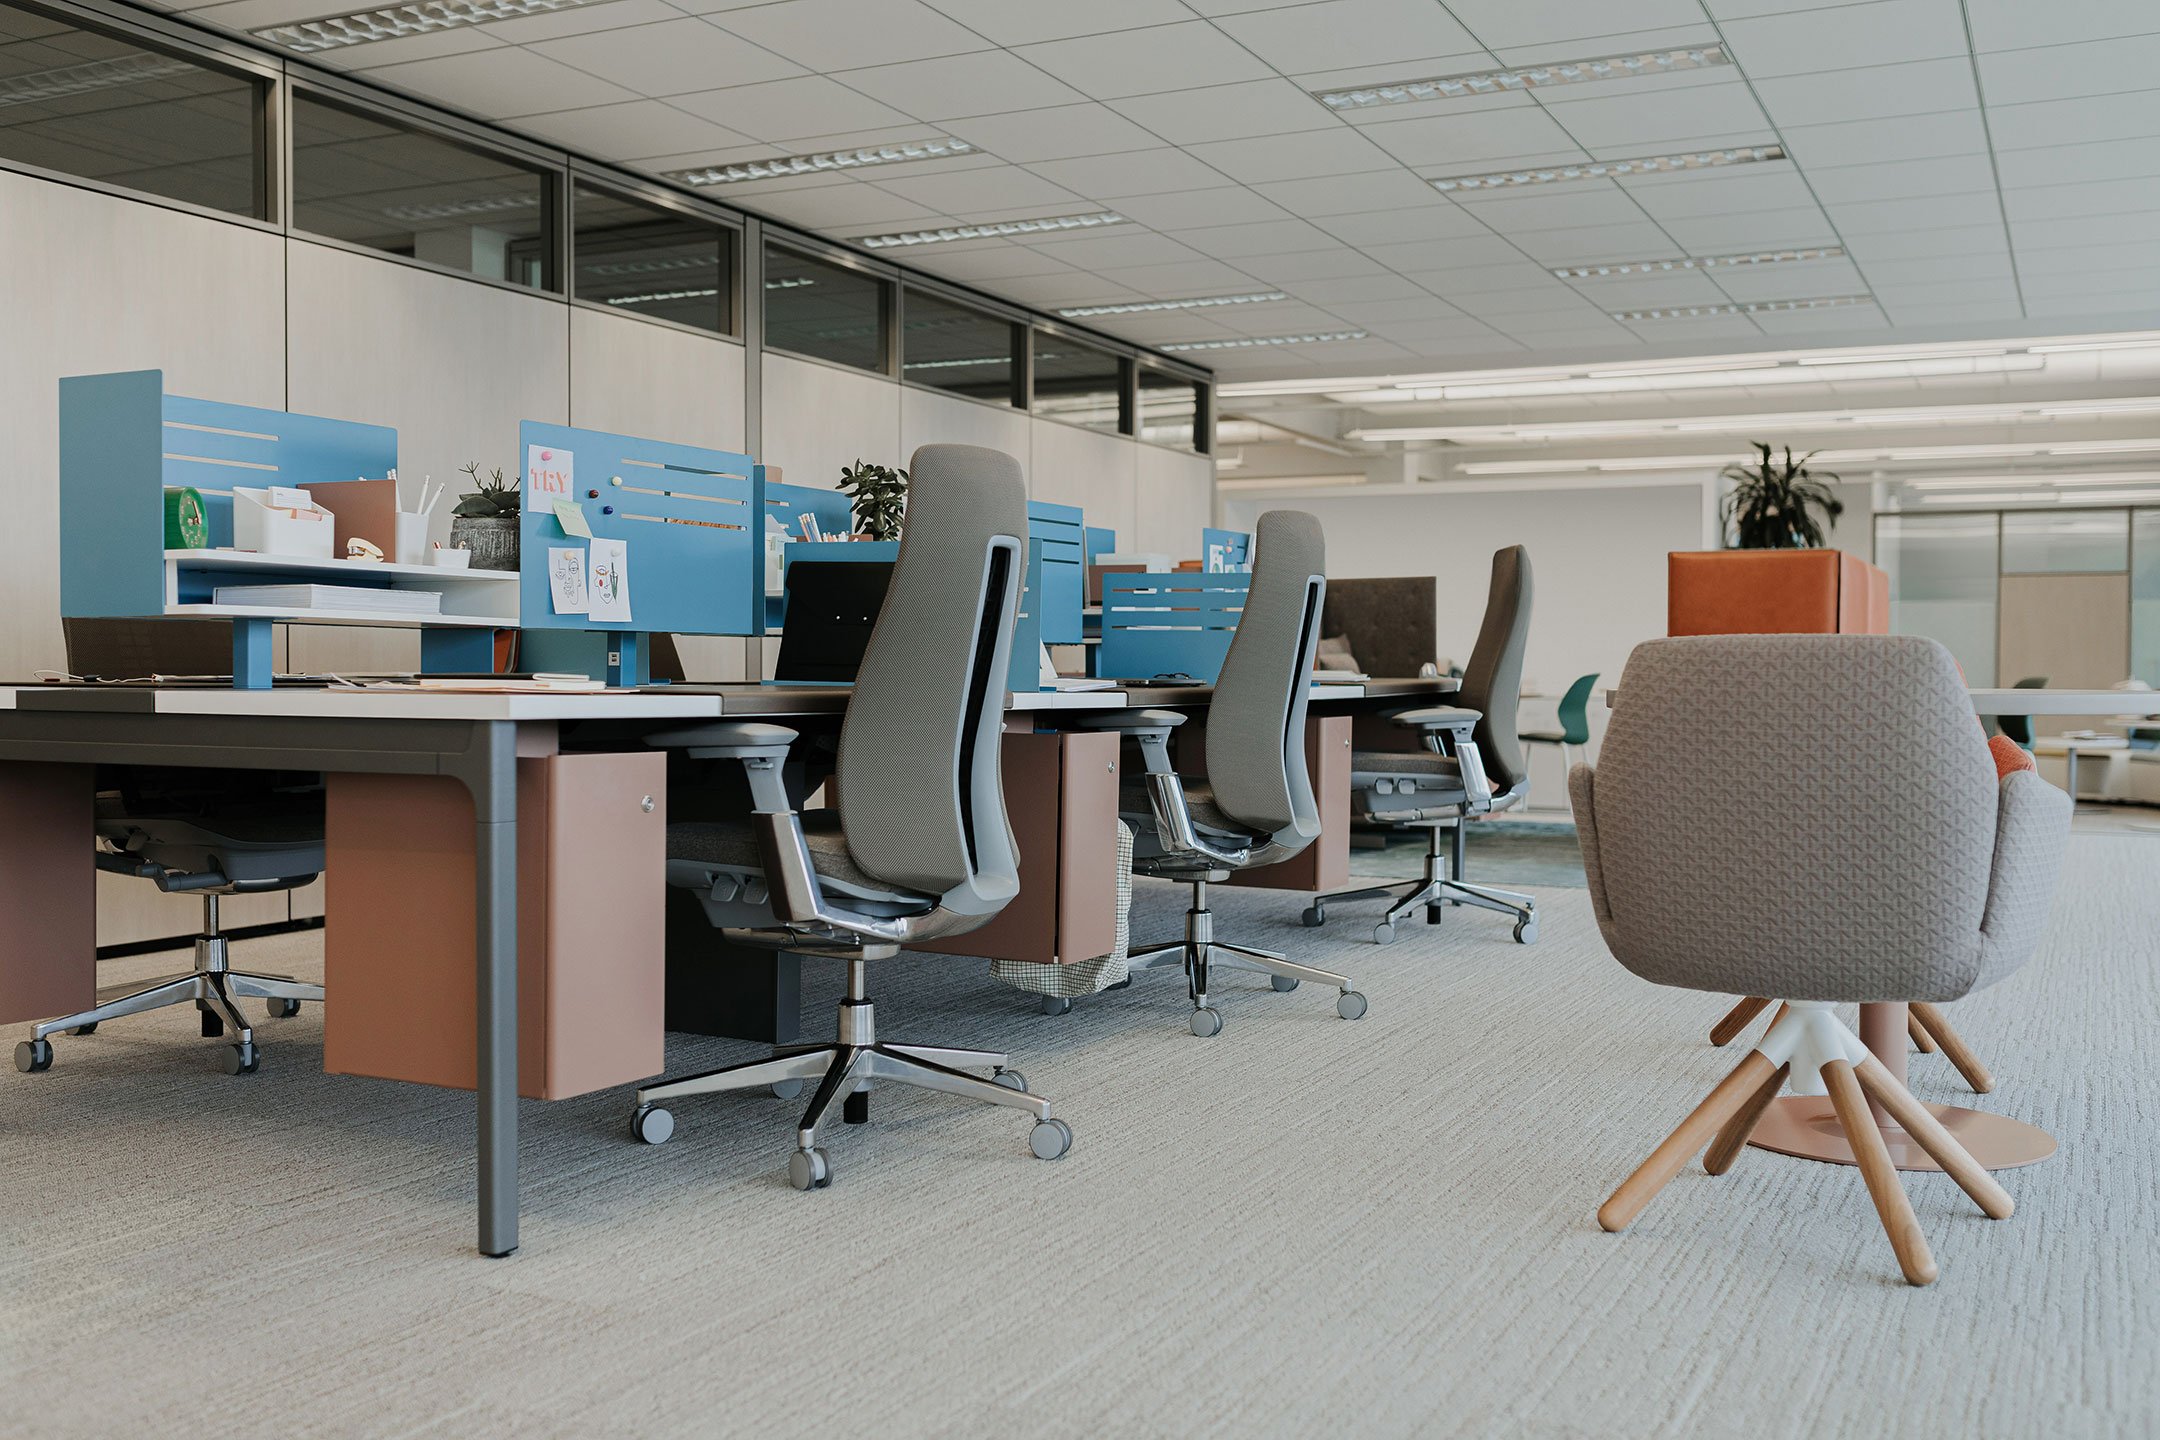 Haworth Intuity Workspace divider in light blue color separating multiple desks with fern chairs in open office setting